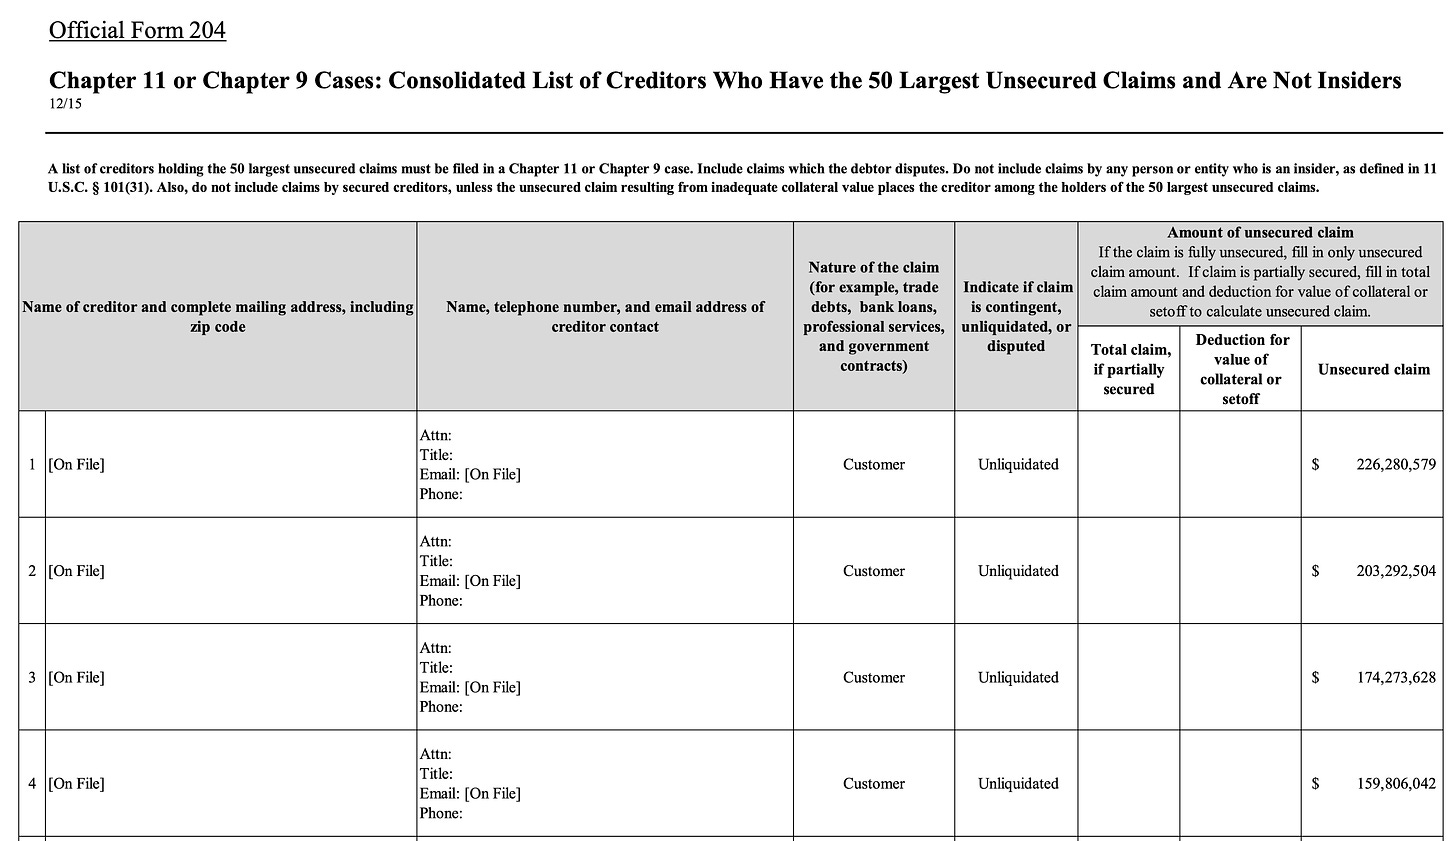 Screenshot of the consolidated list of creditors with the 50 largest unsecured balances. In each table row the name and details simply says "on file".